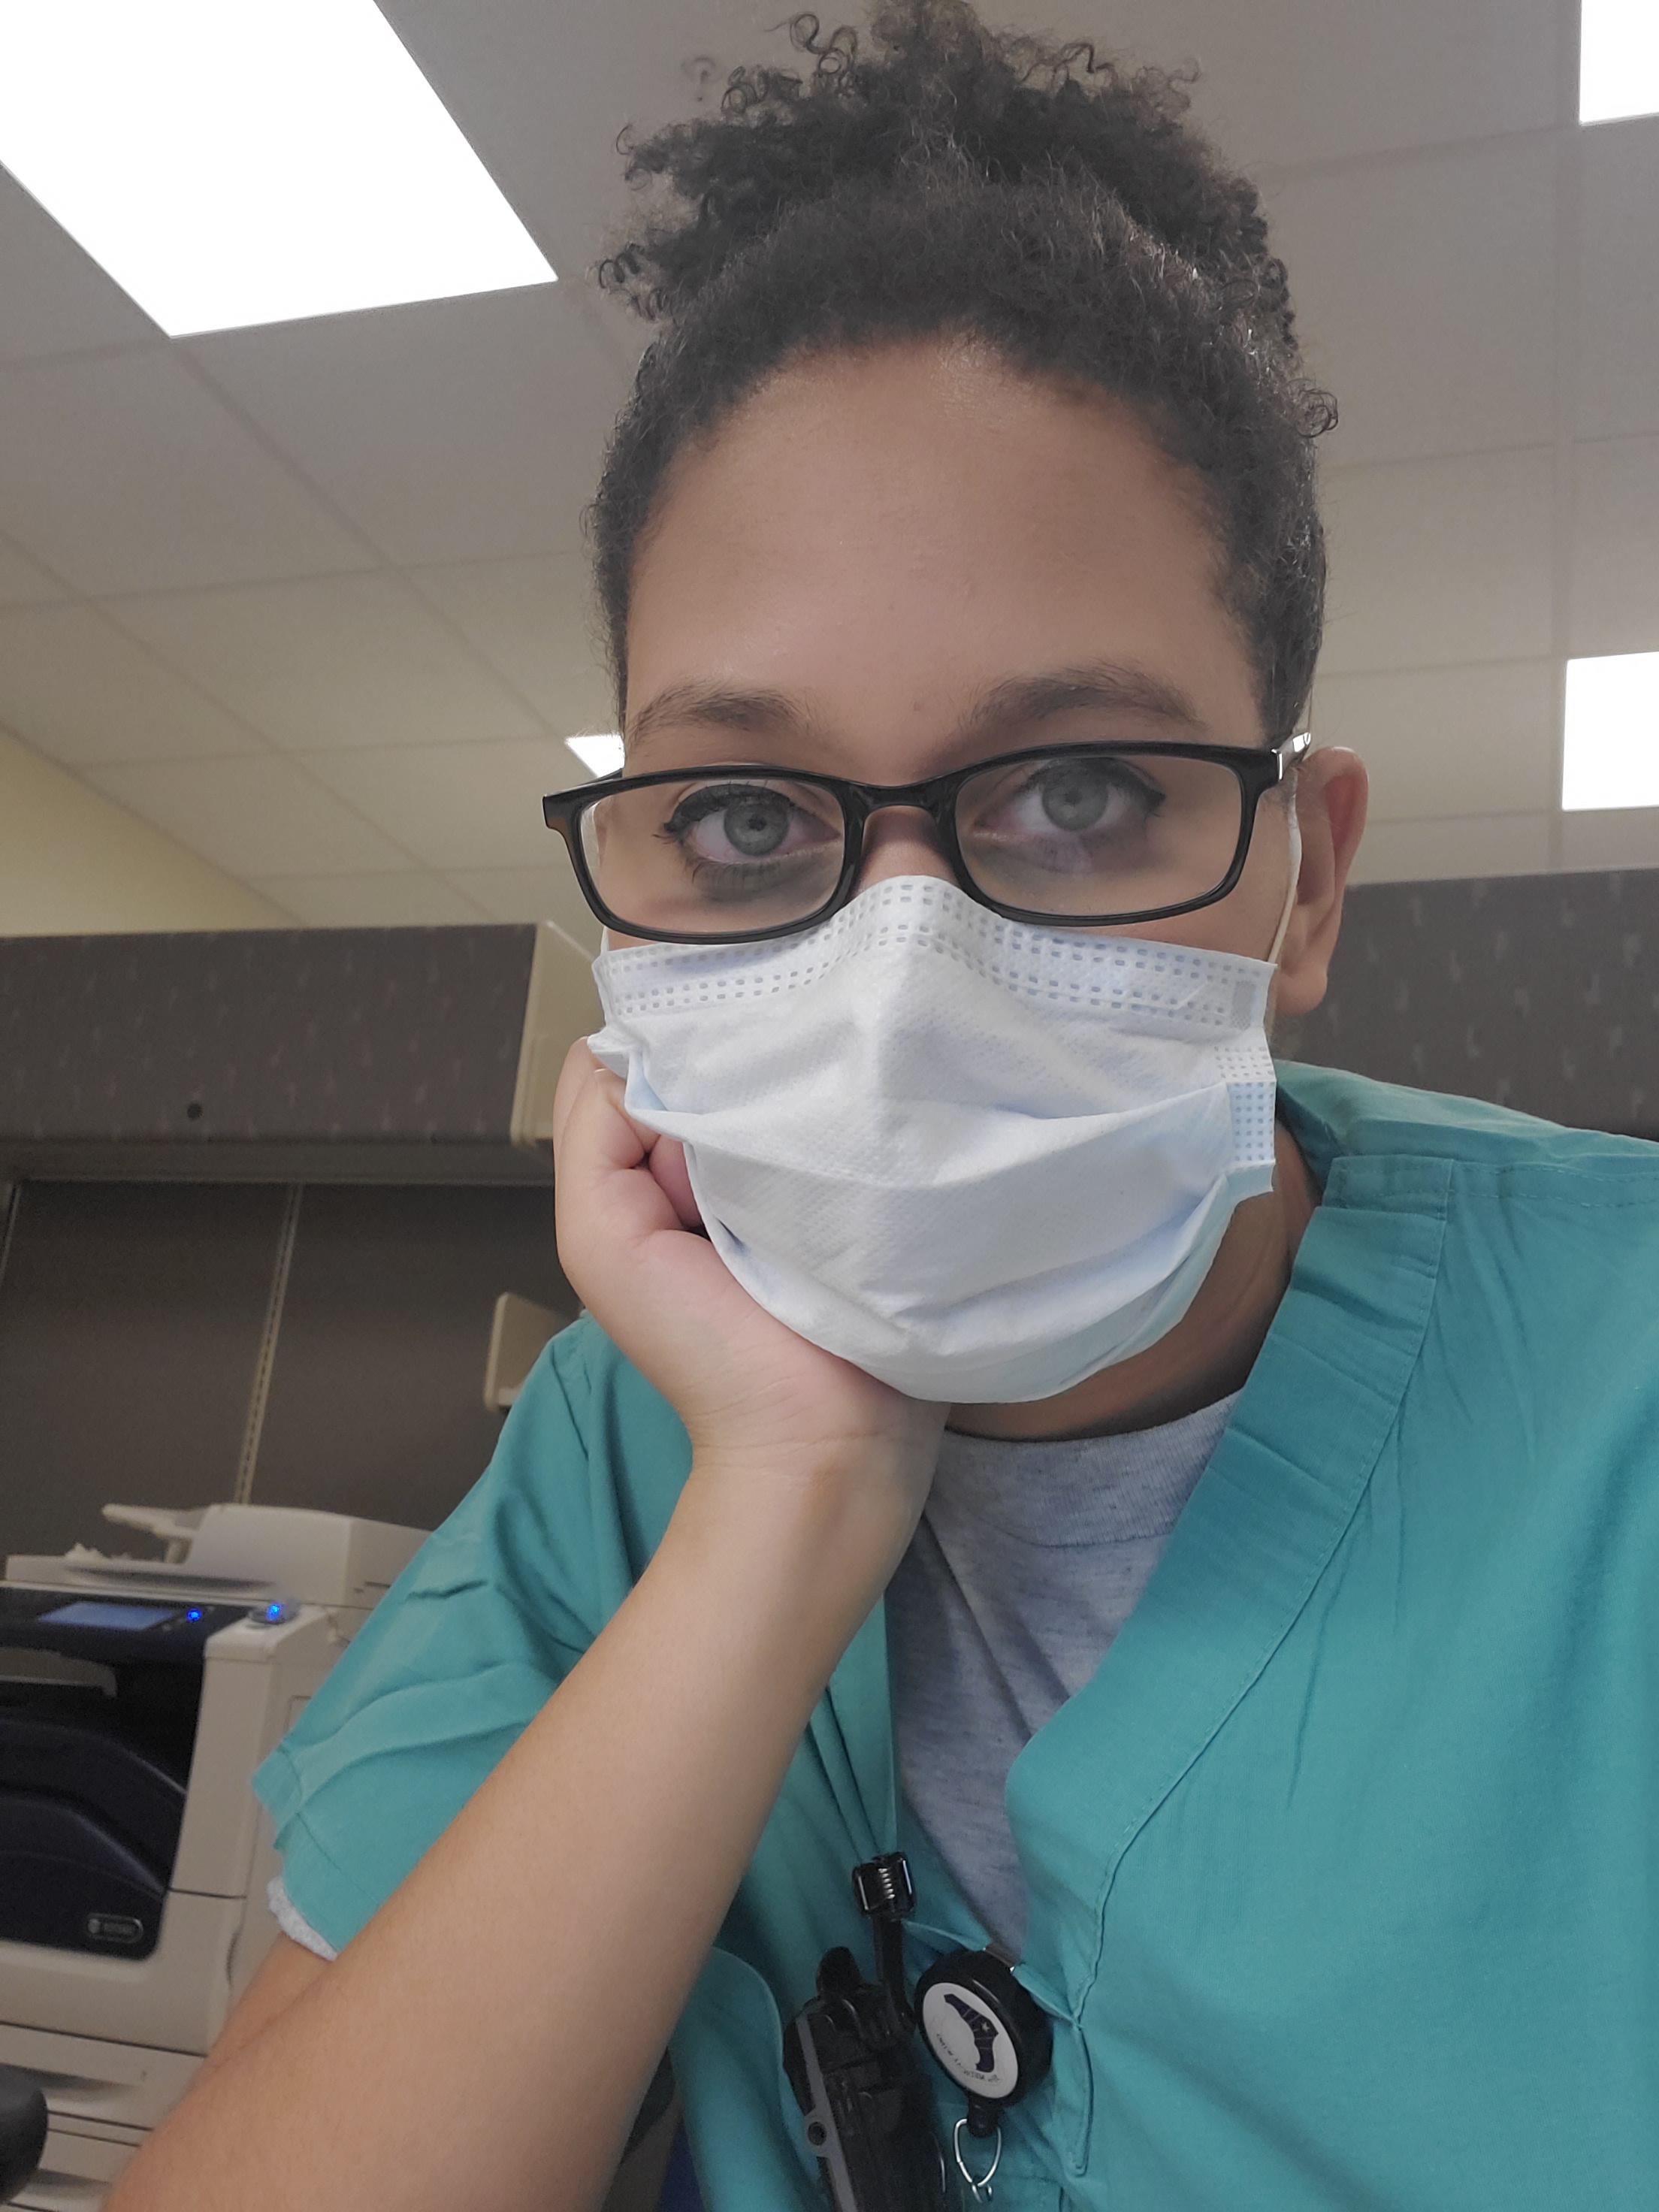 Selfie taken by Emergency Medical Technician Marissa Cyphers while in her face mask